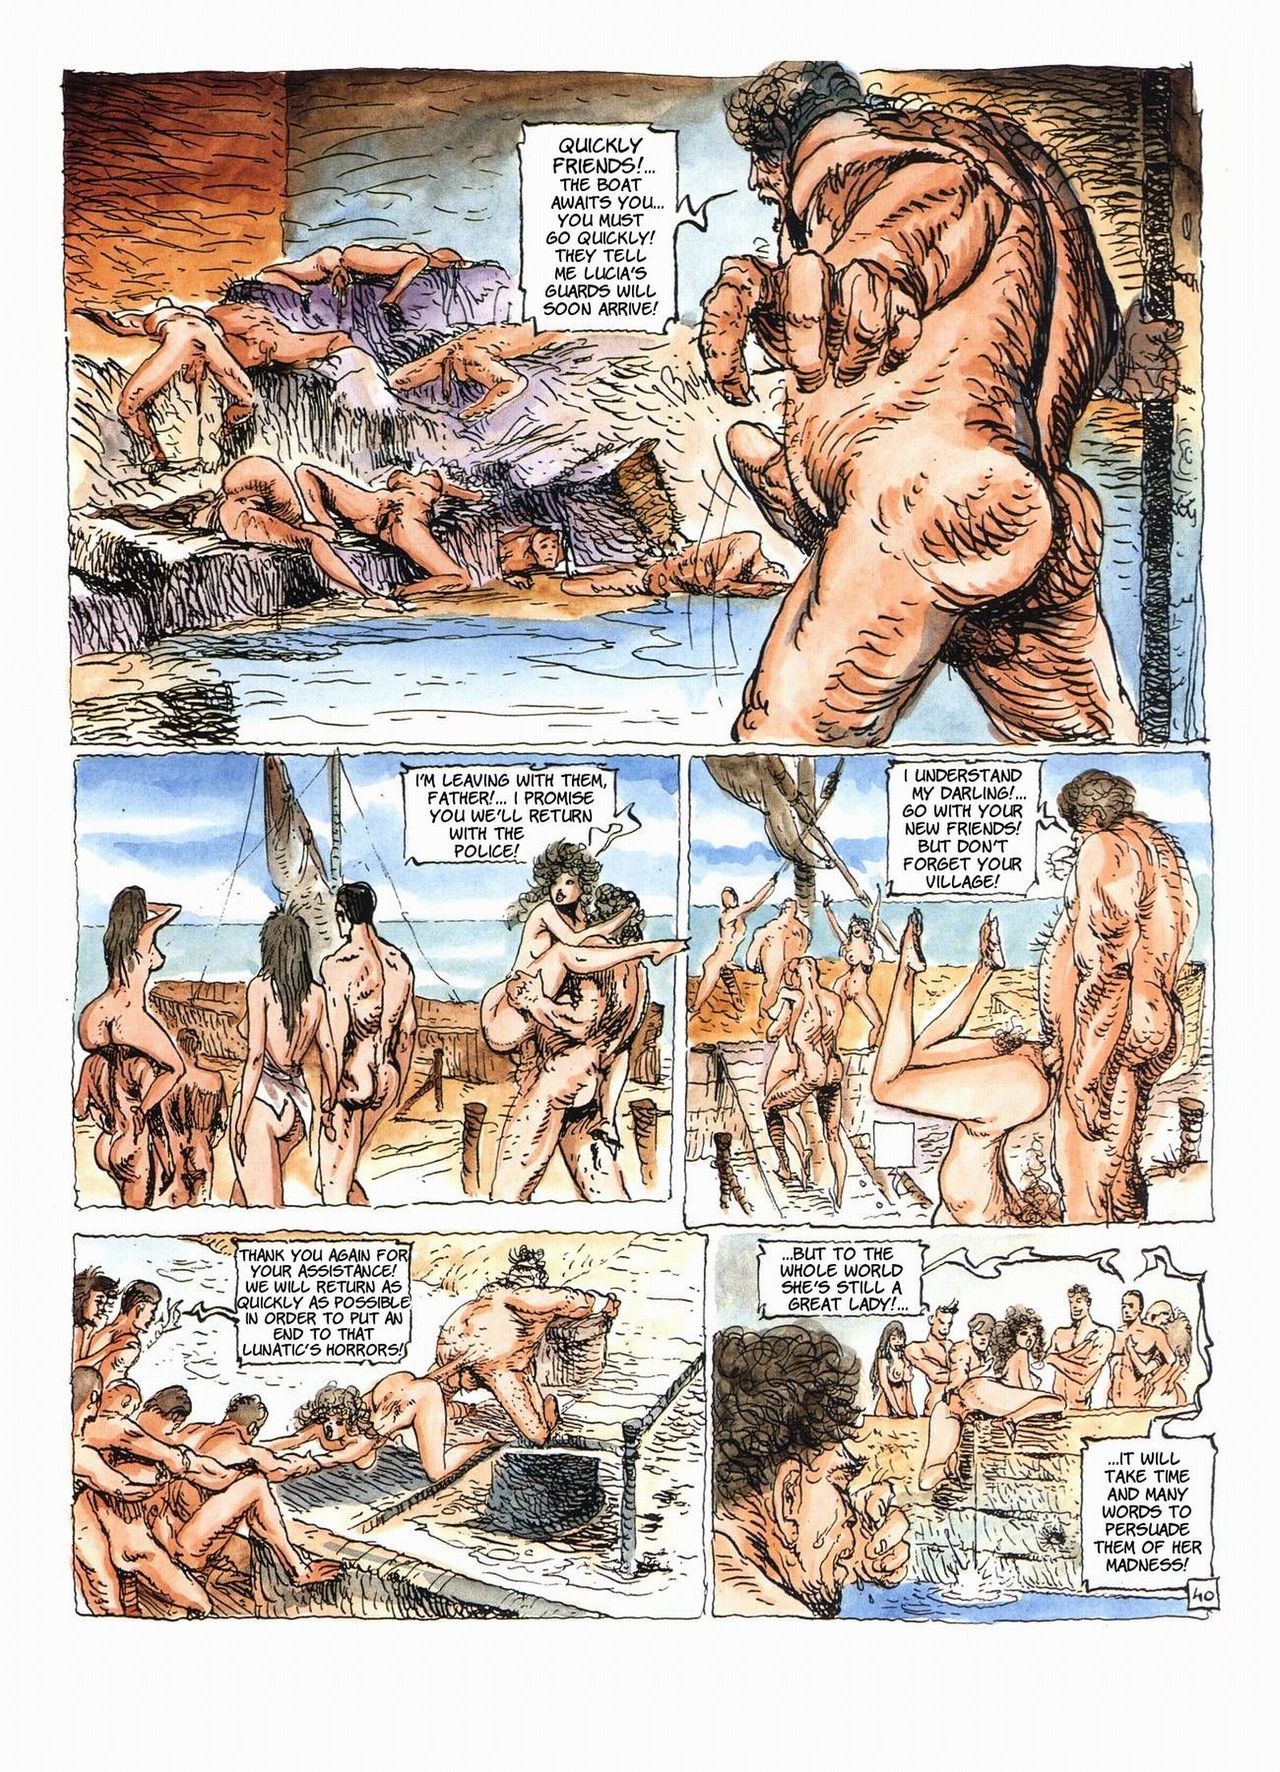 The Island Of Perversions Peter Riverstone page 40